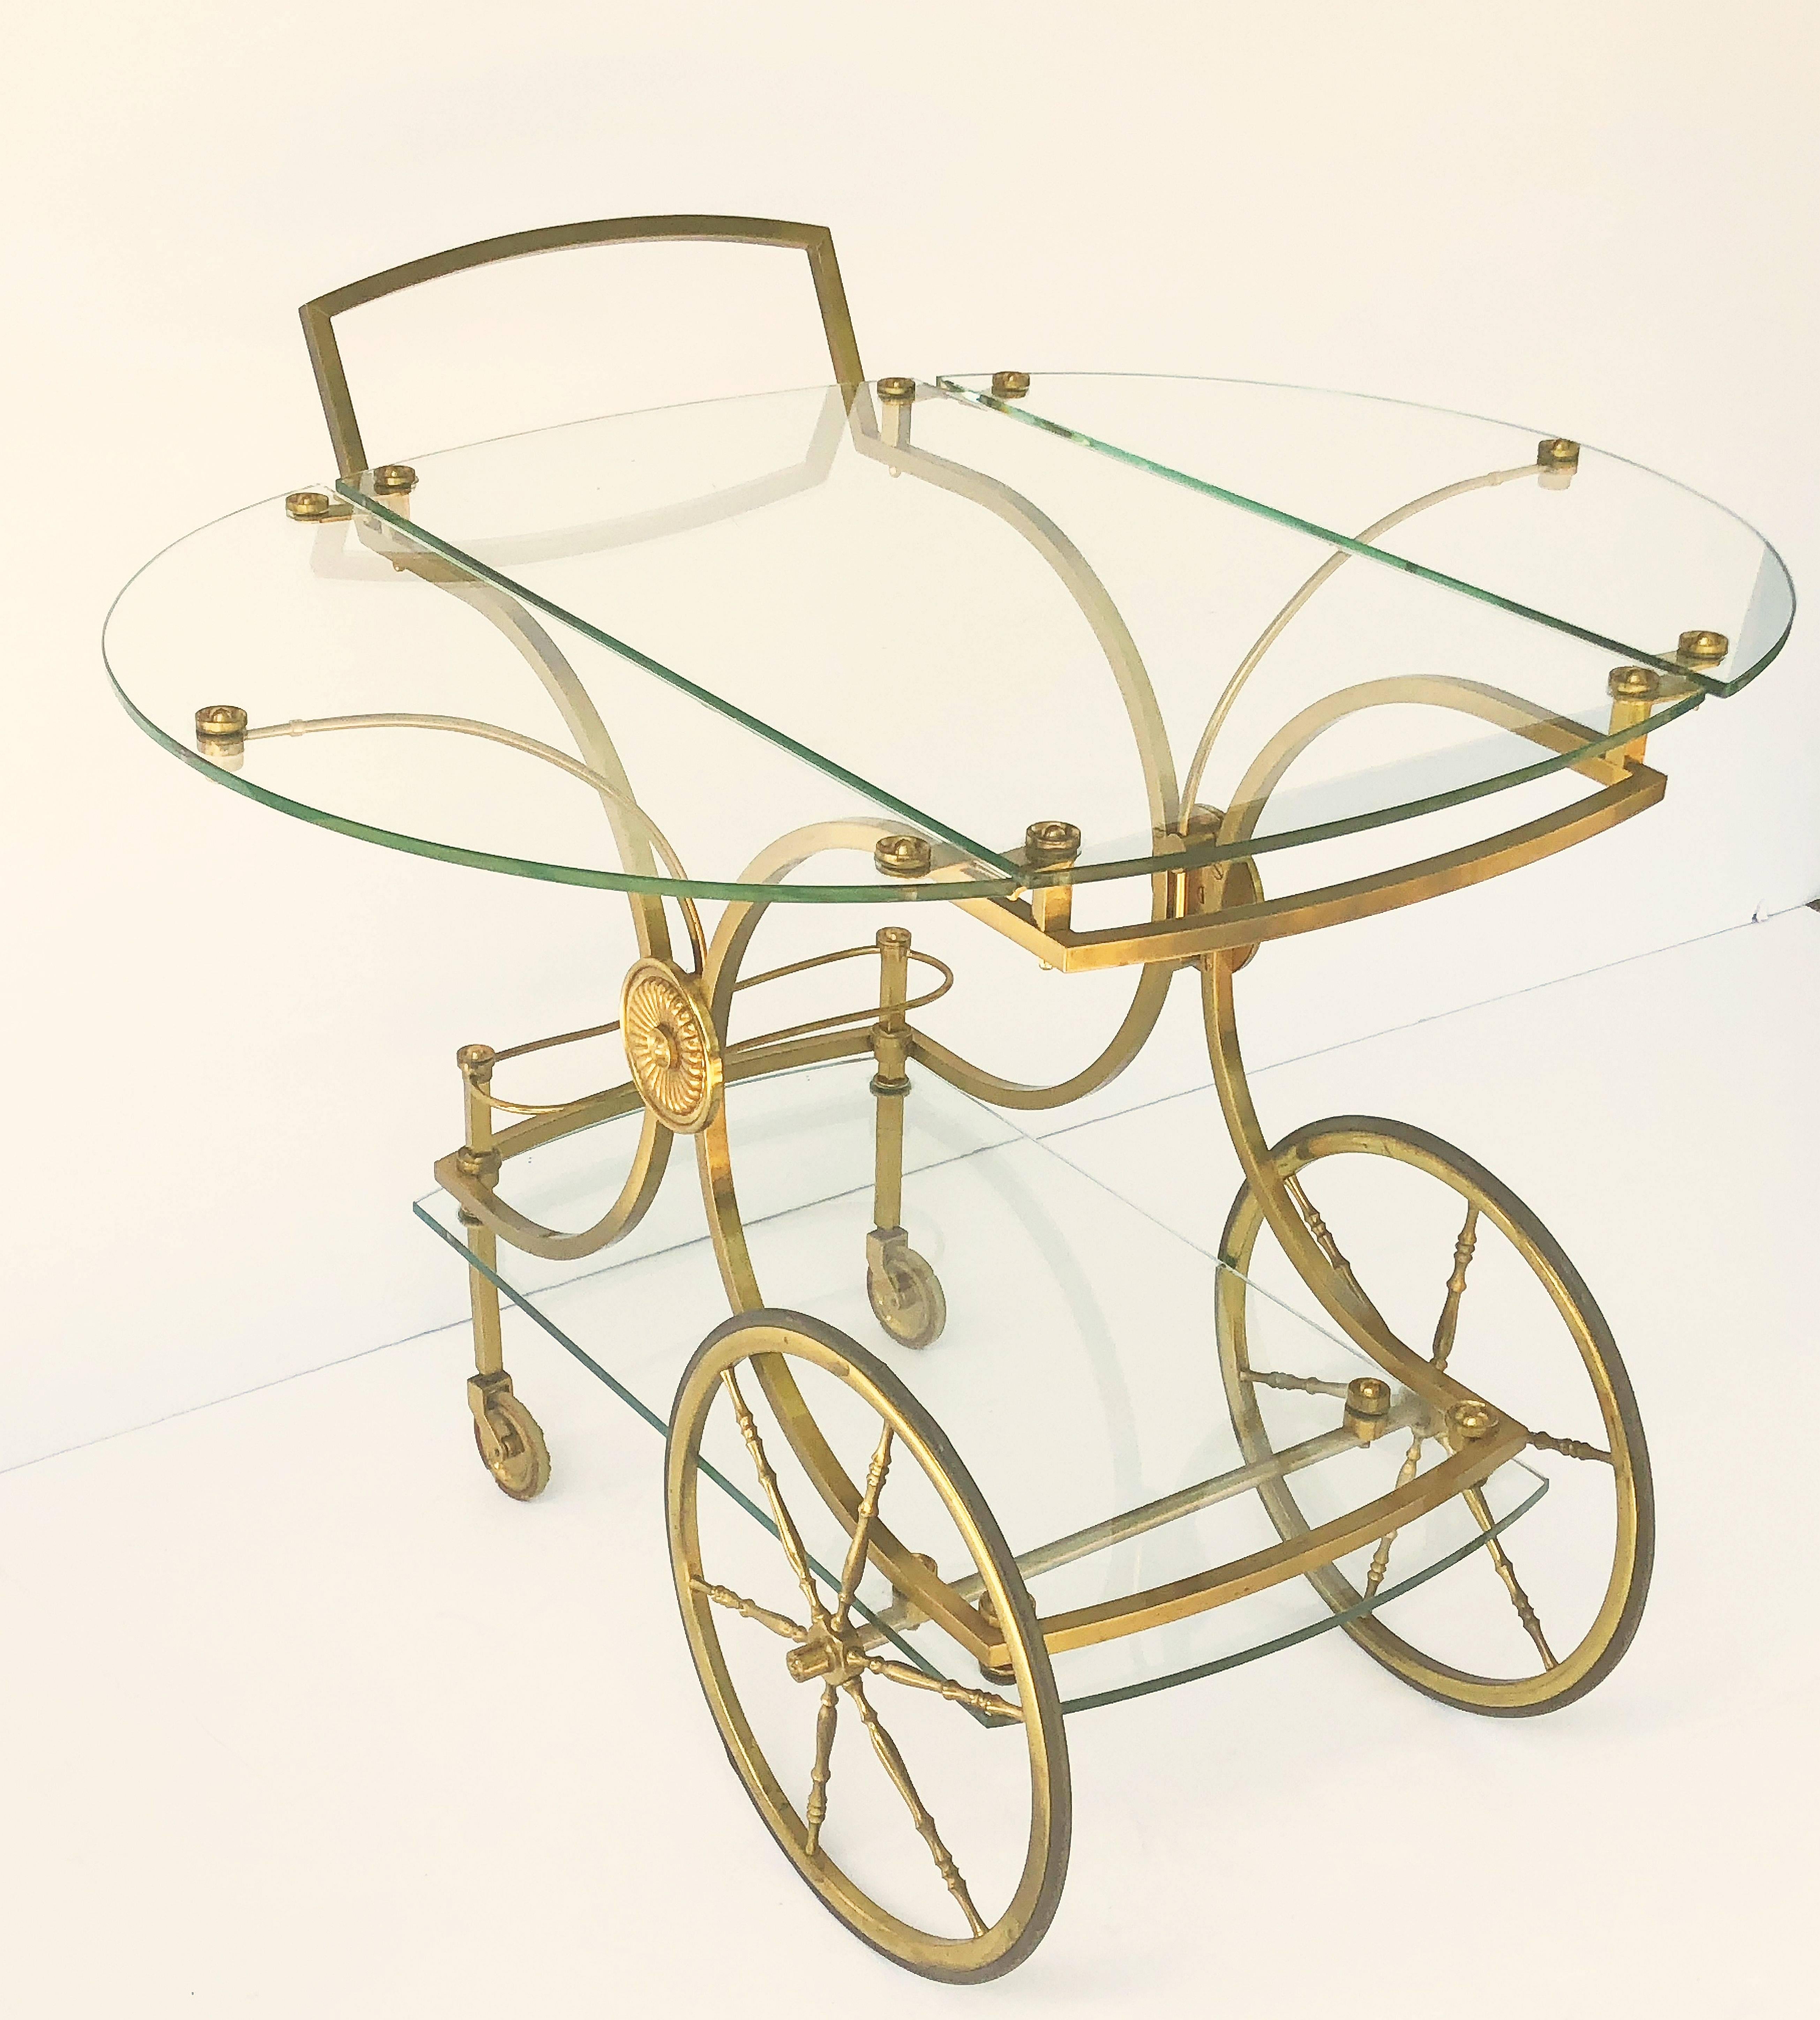 A fine French drinks cart or trolley (bar cart) of bronzed brass and glass by the celebrated Maison Charles, featuring an elegant brass X-frame design decorated with brass rosettes, supporting two glass tops.
There are two supports which swing out